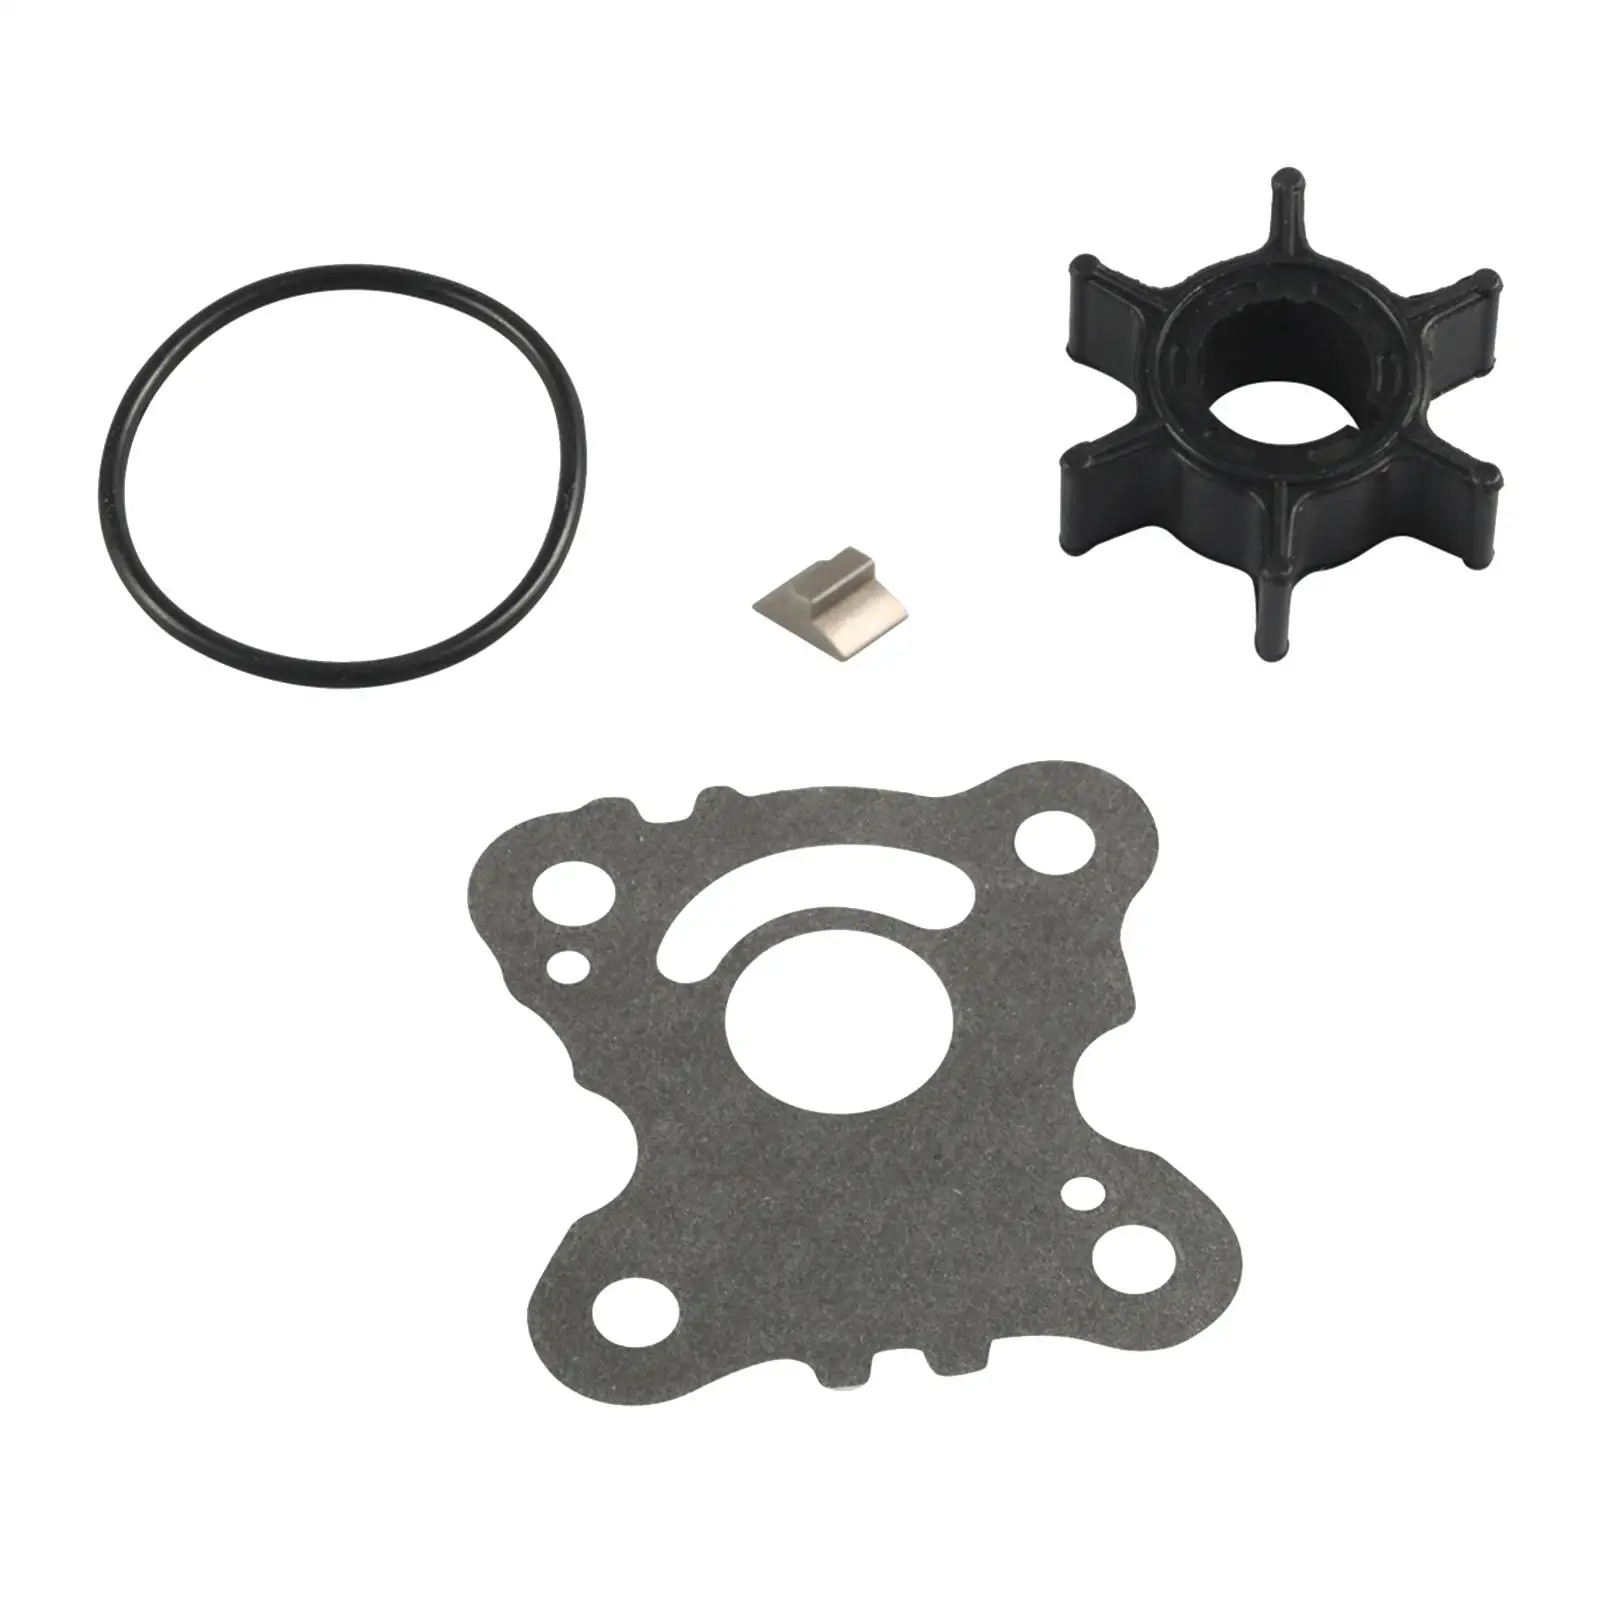 Water Pump Impeller Service Kit for Honda Outboard 8HP 9.9HP 15HP 20HP